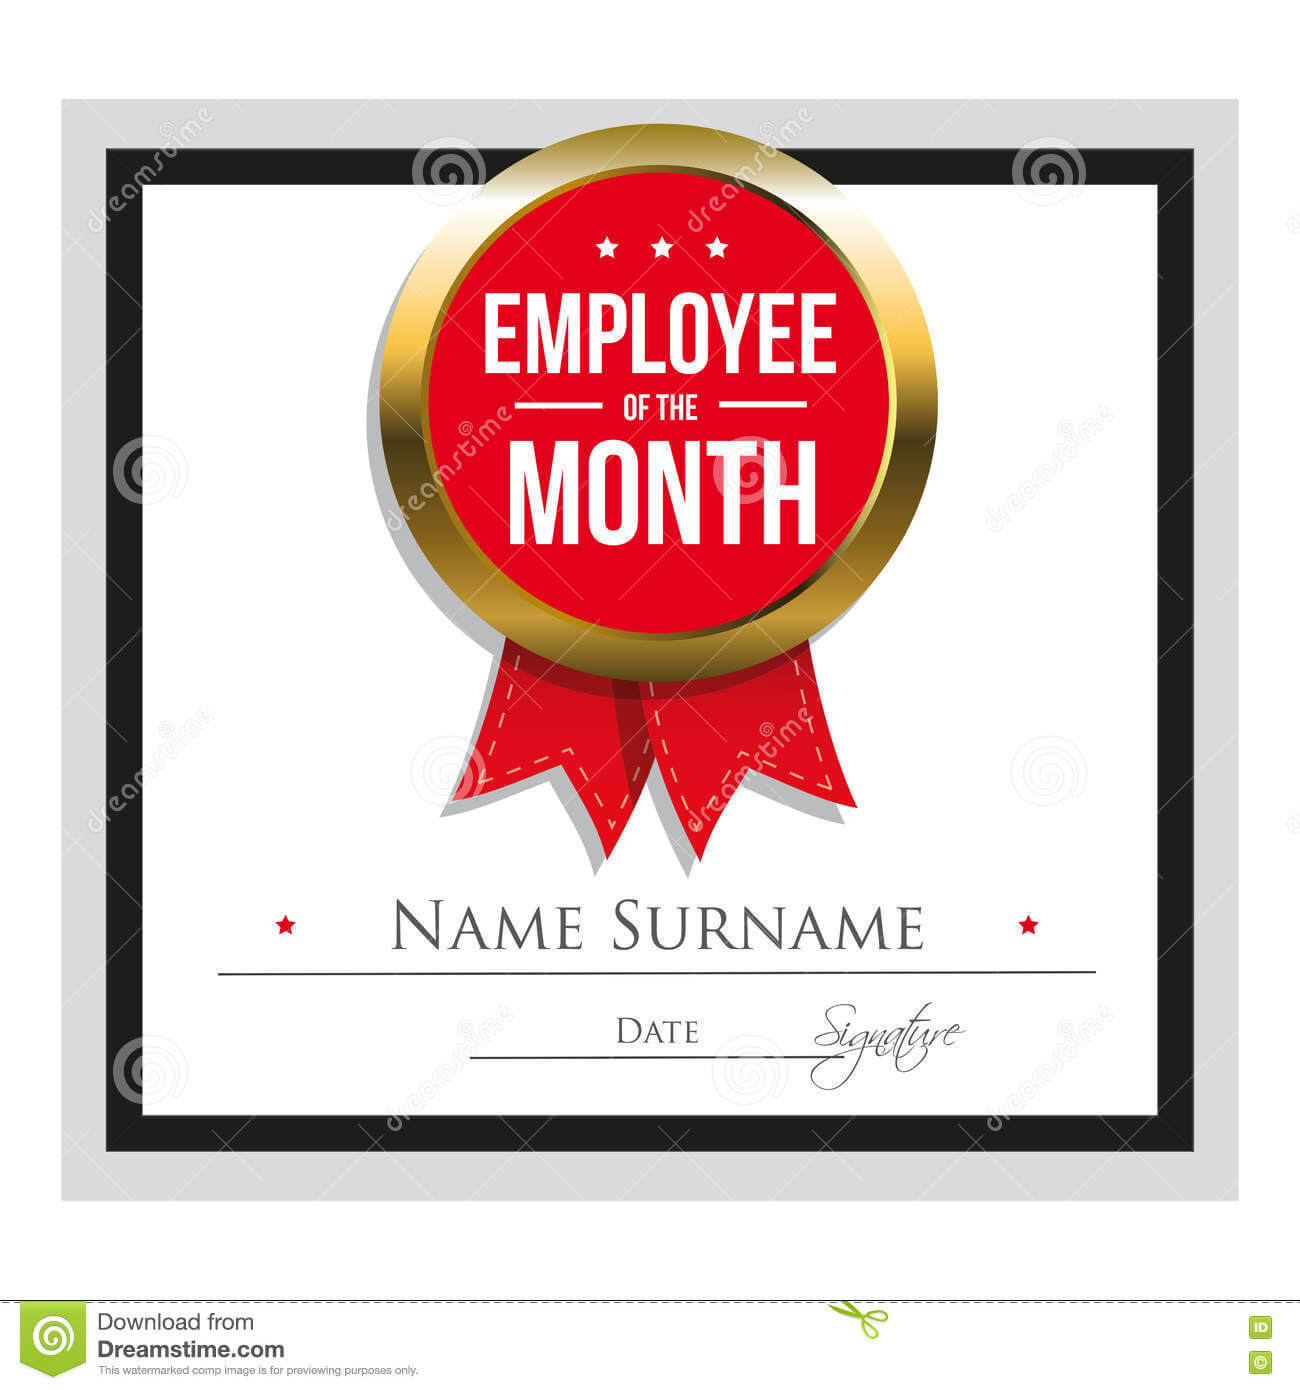 Employee Of The Month Certificate Template Stock Vector With Employee Of The Month Certificate Templates